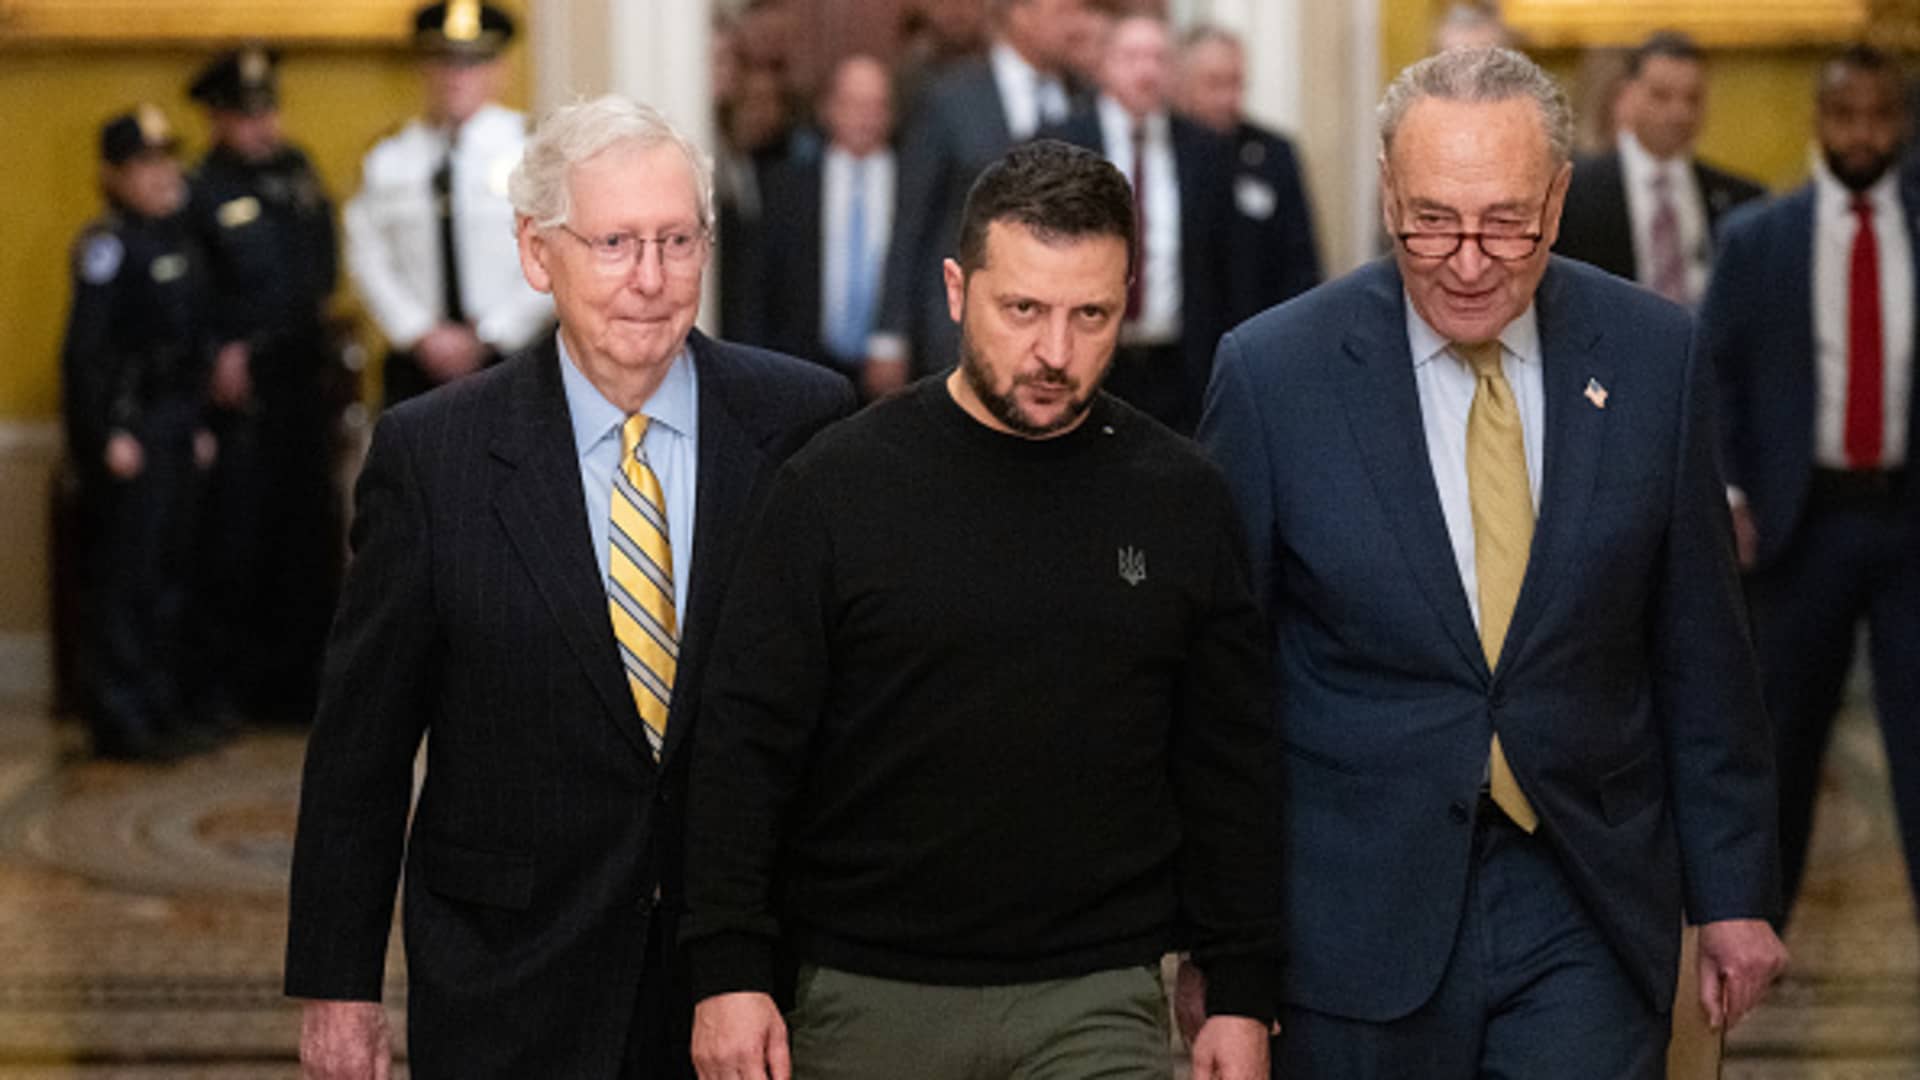 Ukrainian President Volodymyr Zelenskyy, center, is escorted by Senate Minority Leader Mitch McConnell, R-Ky., left, and Senate Majority Leader Chuck Schumer, D-N.Y., to his meeting on military aid with U.S. Senators in the U.S. Capitol on Tuesday, December 12, 2023.